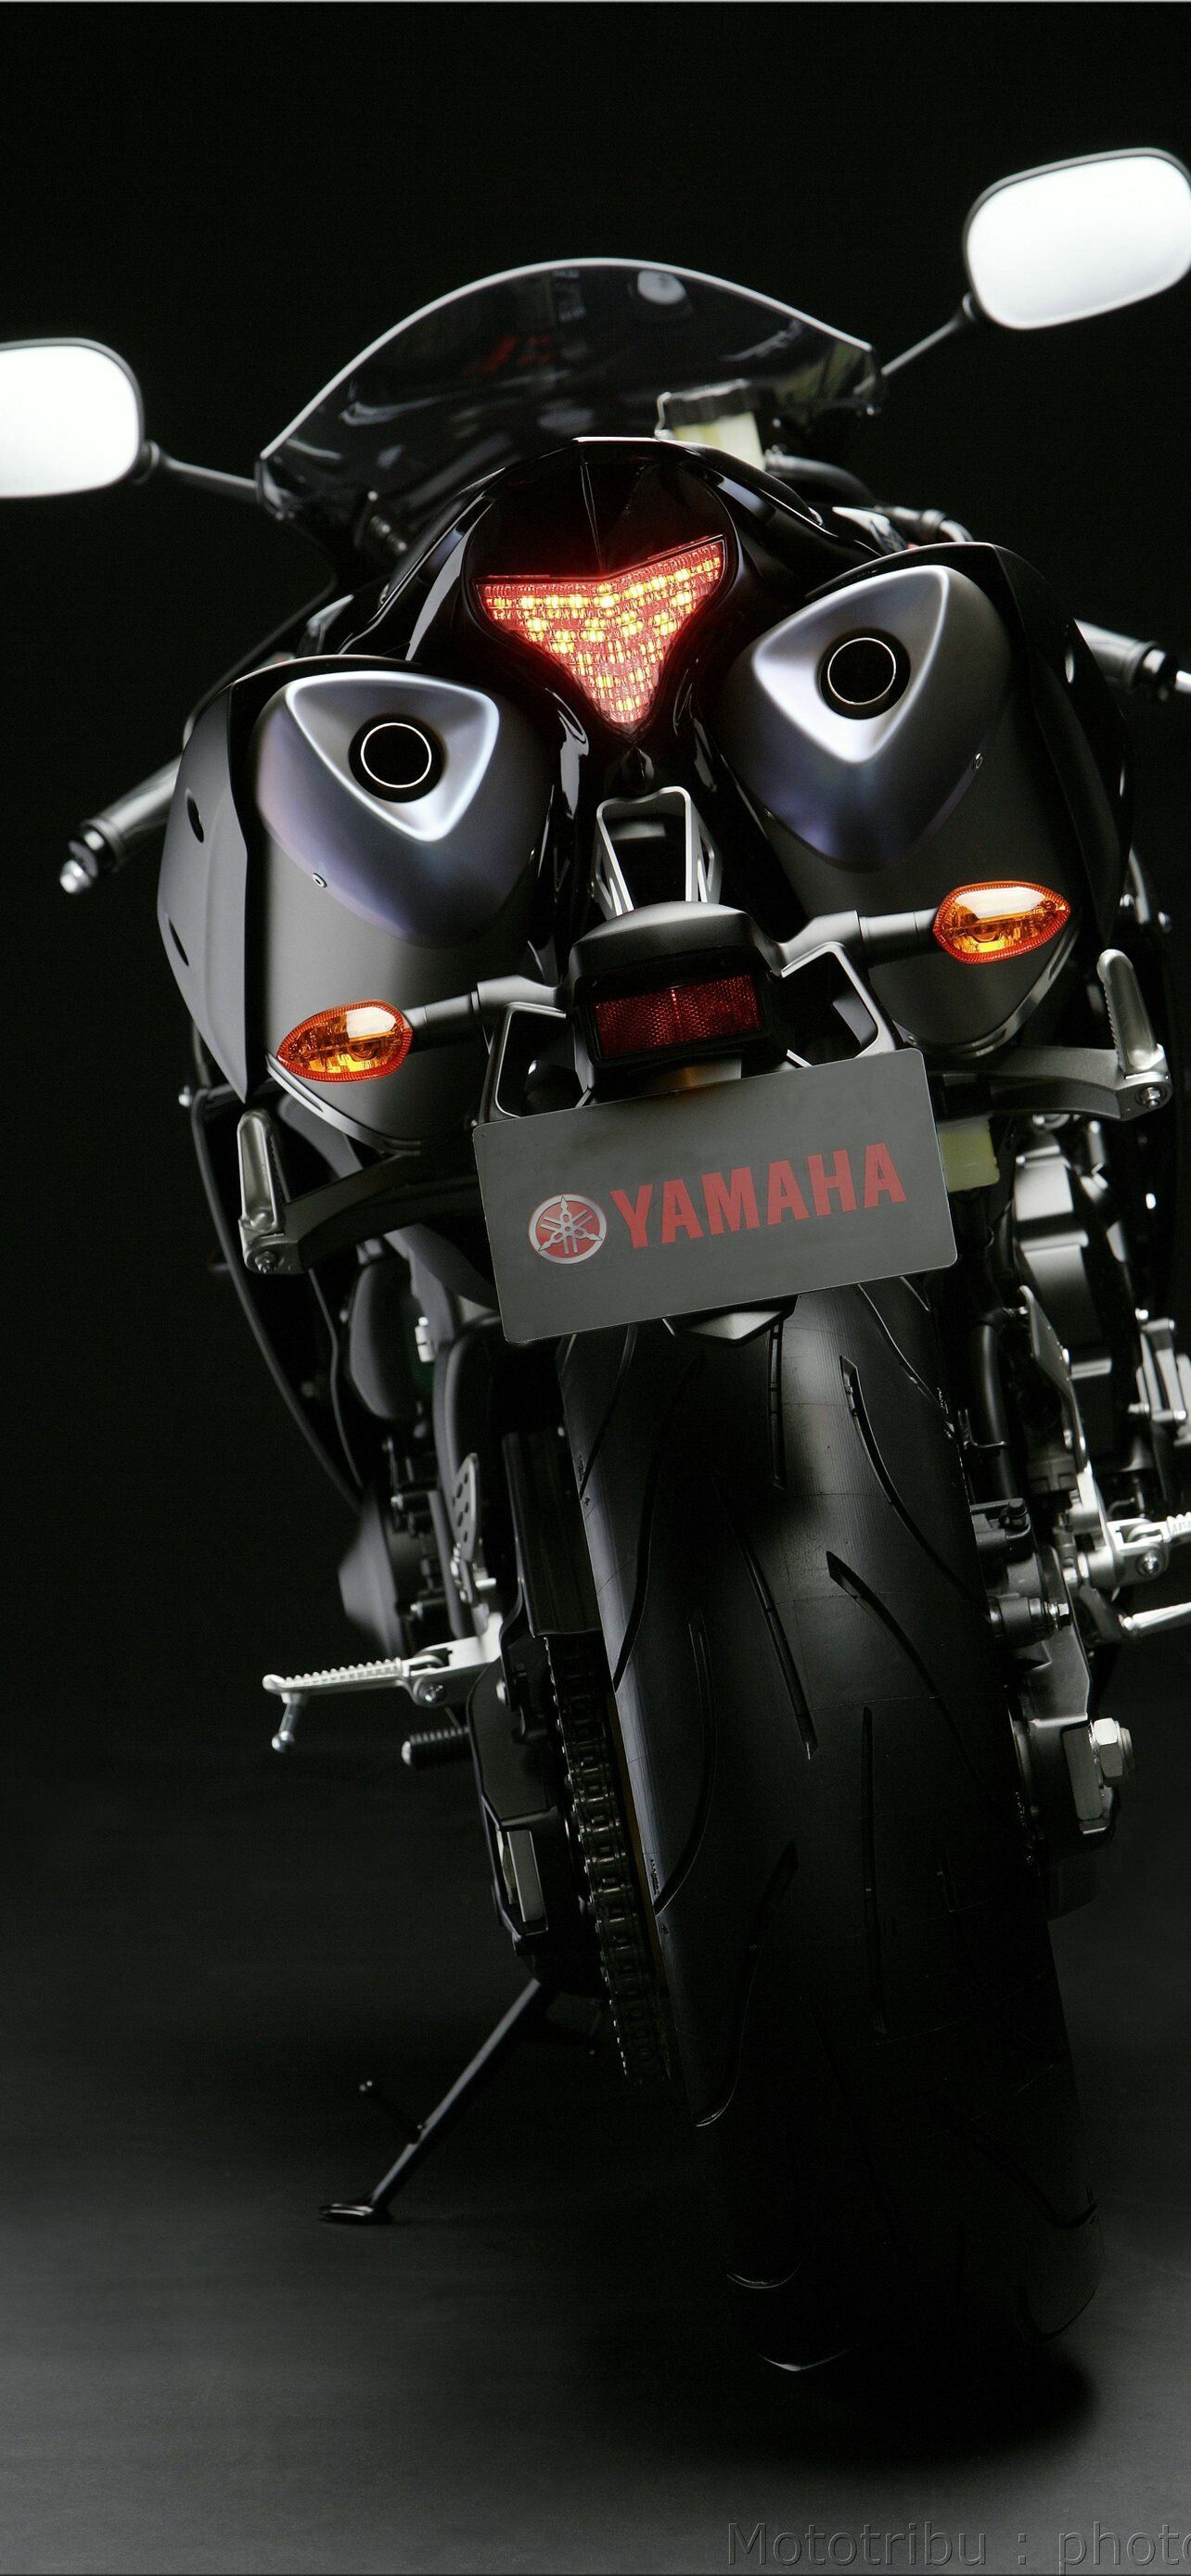 Yamaha R6 iPhone wallpapers, Free download, Mobile, High quality, 1290x2780 HD Phone